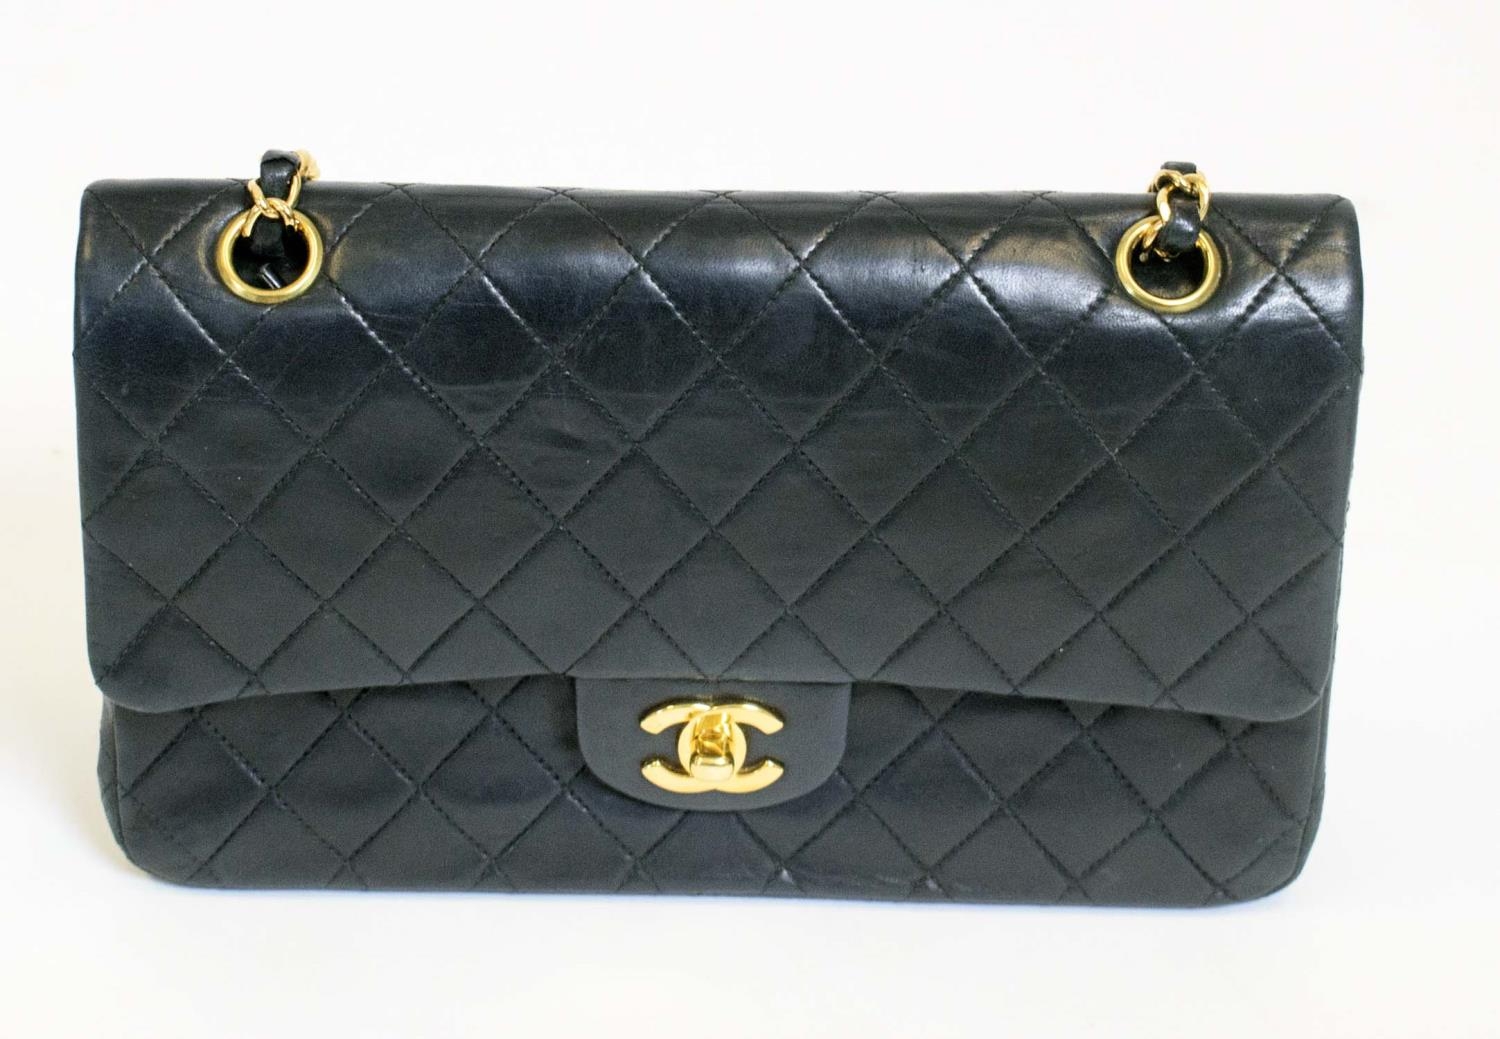 CHANEL FLAP BAG, with front double flap closure, quilted effect and gold hardware, chain and leather - Image 2 of 13